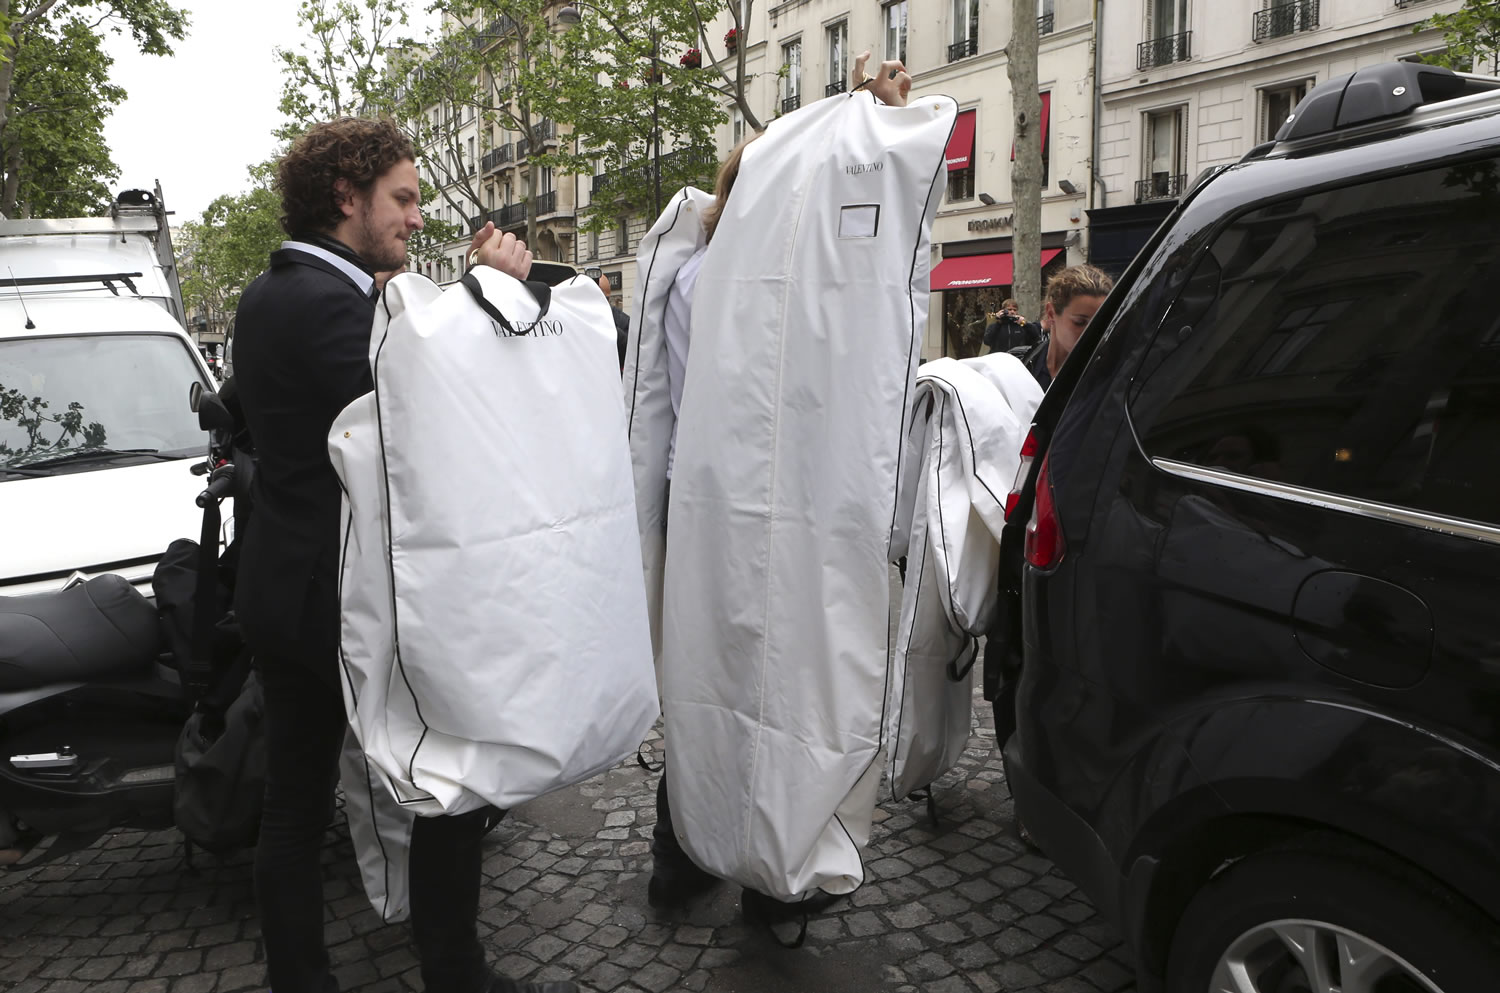 Valentino fashion house employees leave Kanye West's apartment Wednesday after a fitting in Paris.